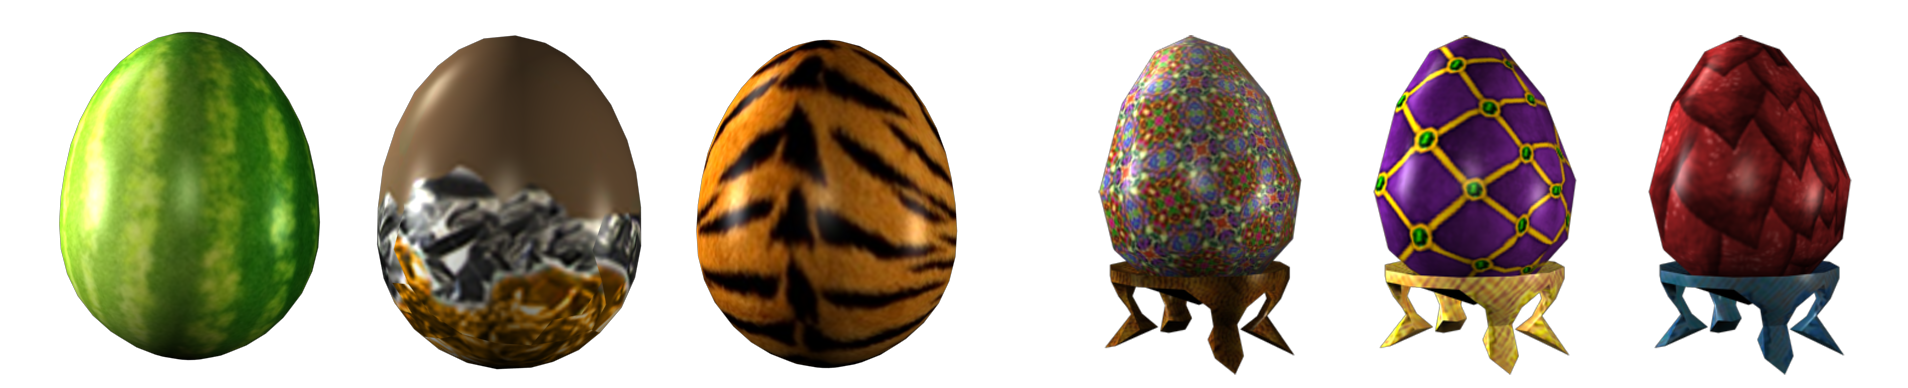 Presenting The Winners Of The Egg And Face Design Contests Roblox Blog - egg hunt 2019 avatar contest winners roblox blog